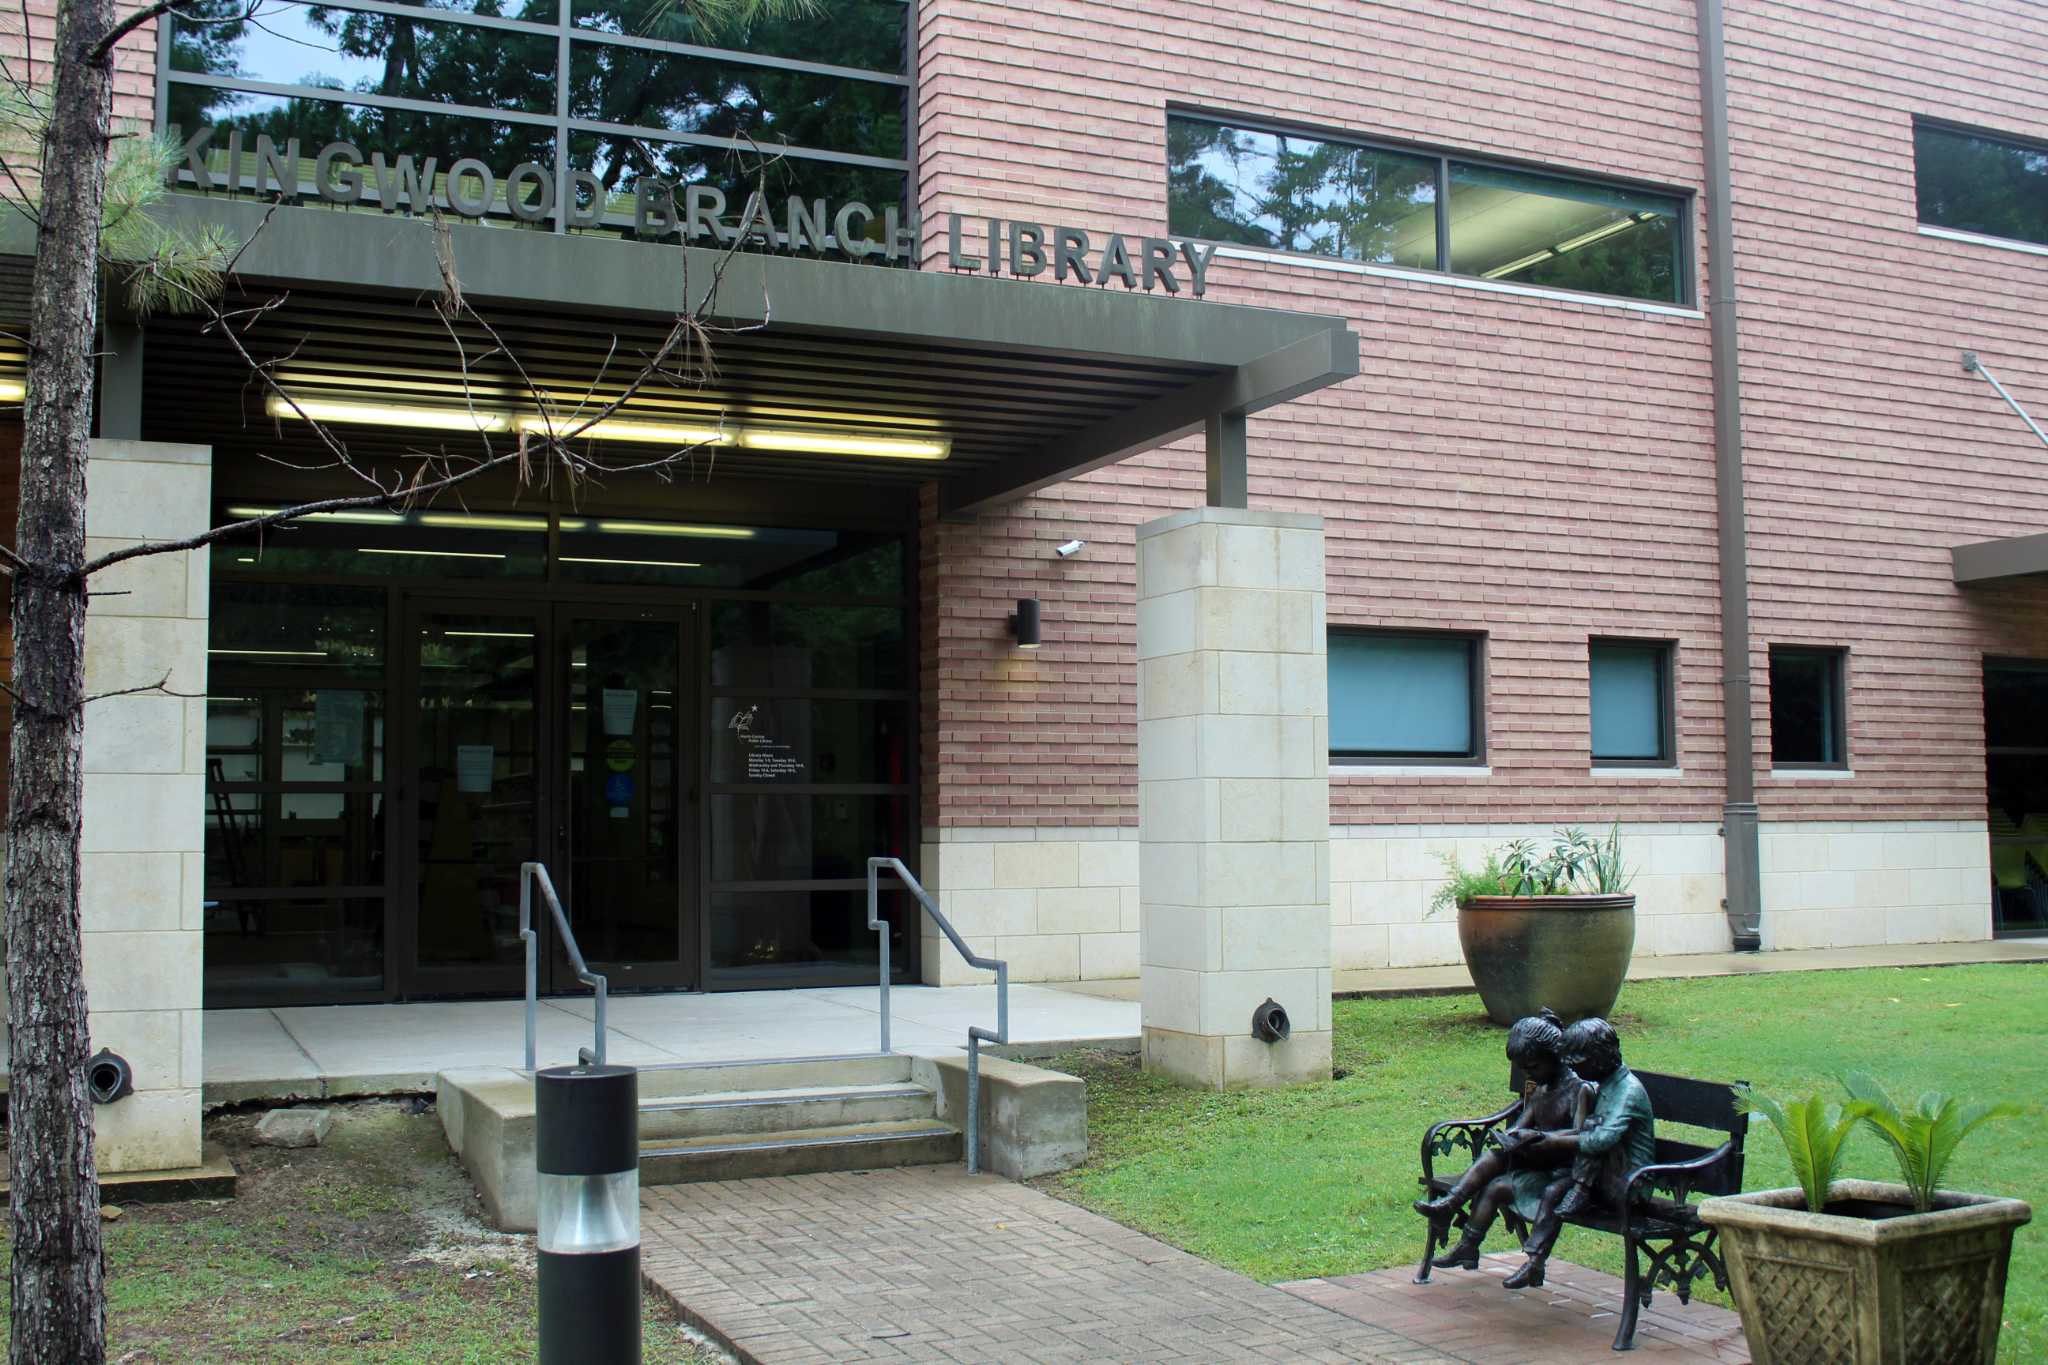 Kingwood Library Reopens May 29 After 9 Month Closure 1 5